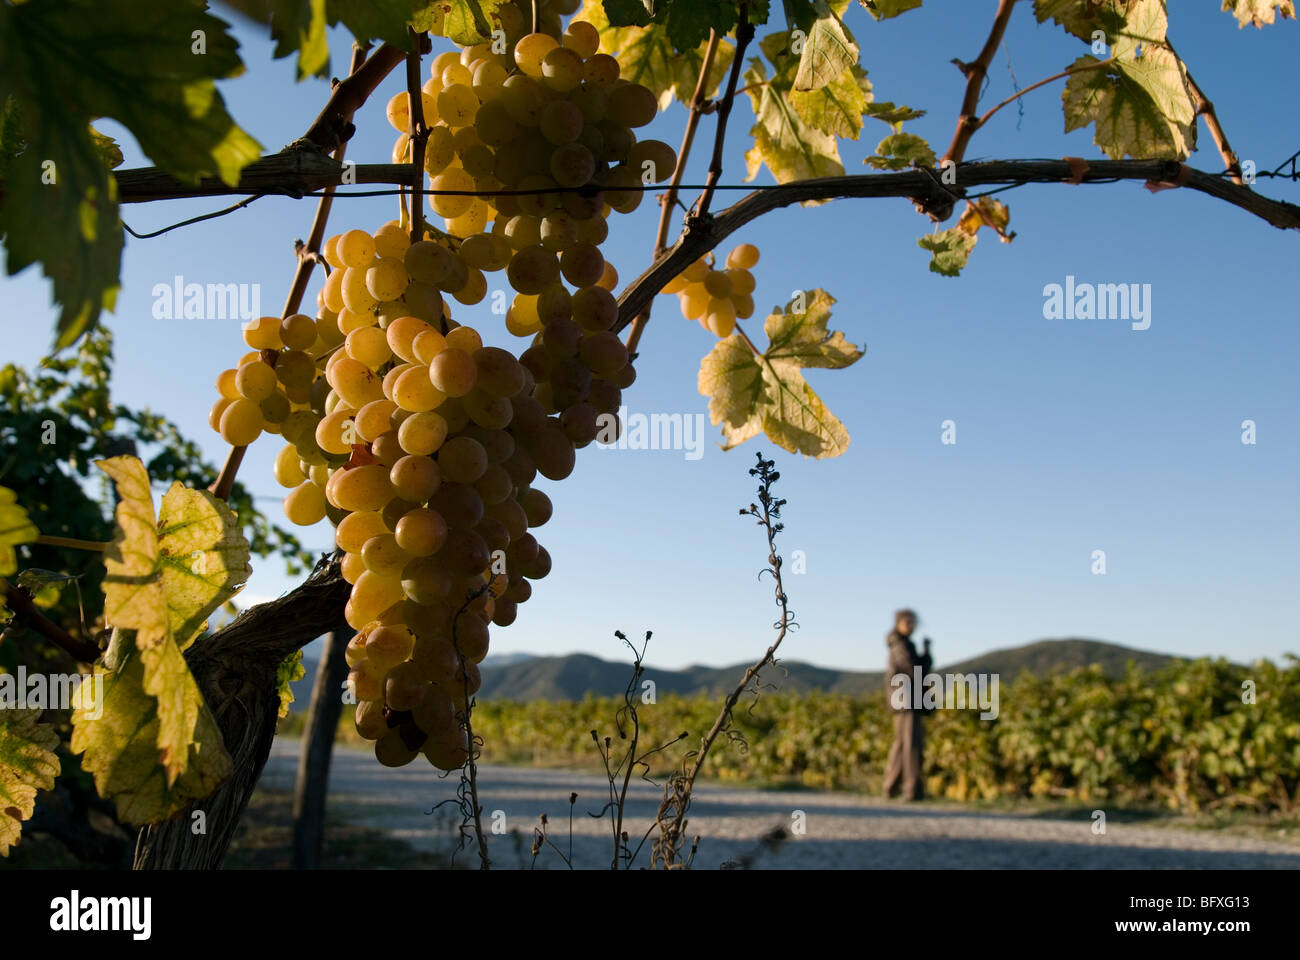 White / green grapes ripening on the vine with a figure in the background. Stock Photo